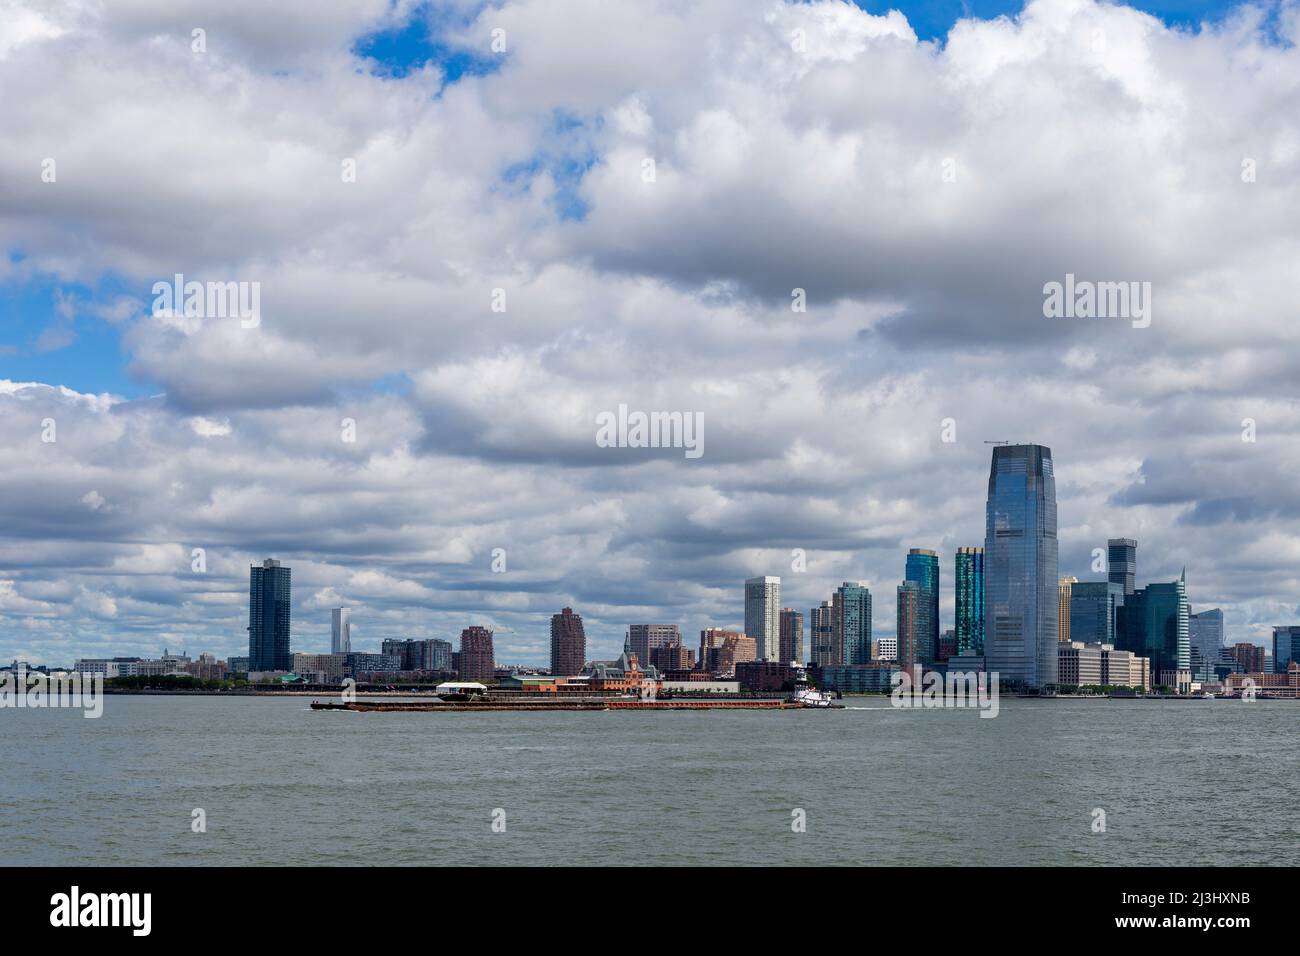 MANHATTAN, New York City, NY, USA, View on Ellis Island in New York harbor, famous island where new immigrants had a place to enter USA, land of freedom. Stock Photo